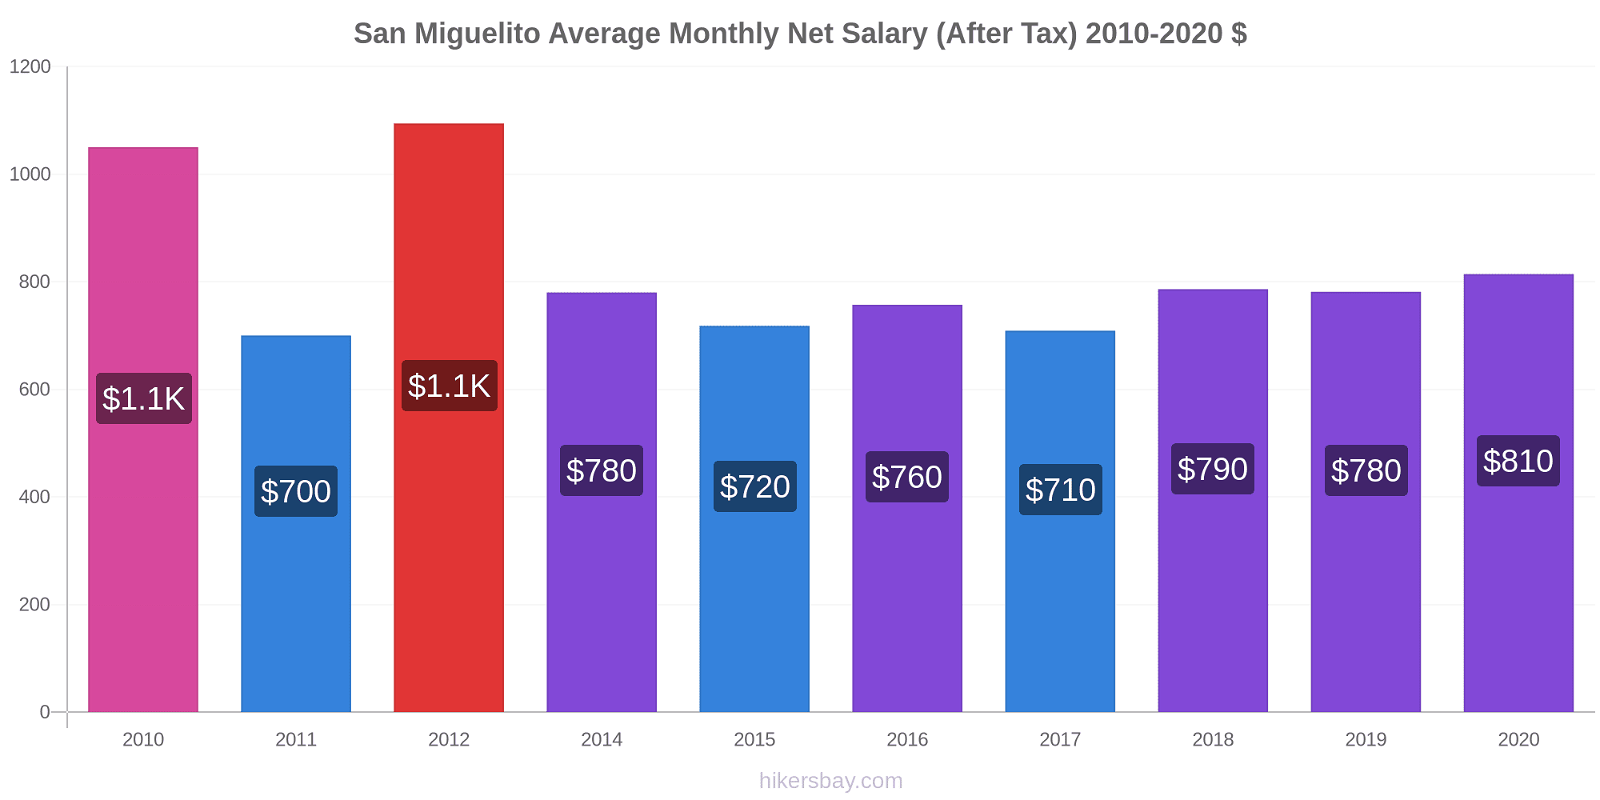 San Miguelito price changes Average Monthly Net Salary (After Tax) hikersbay.com